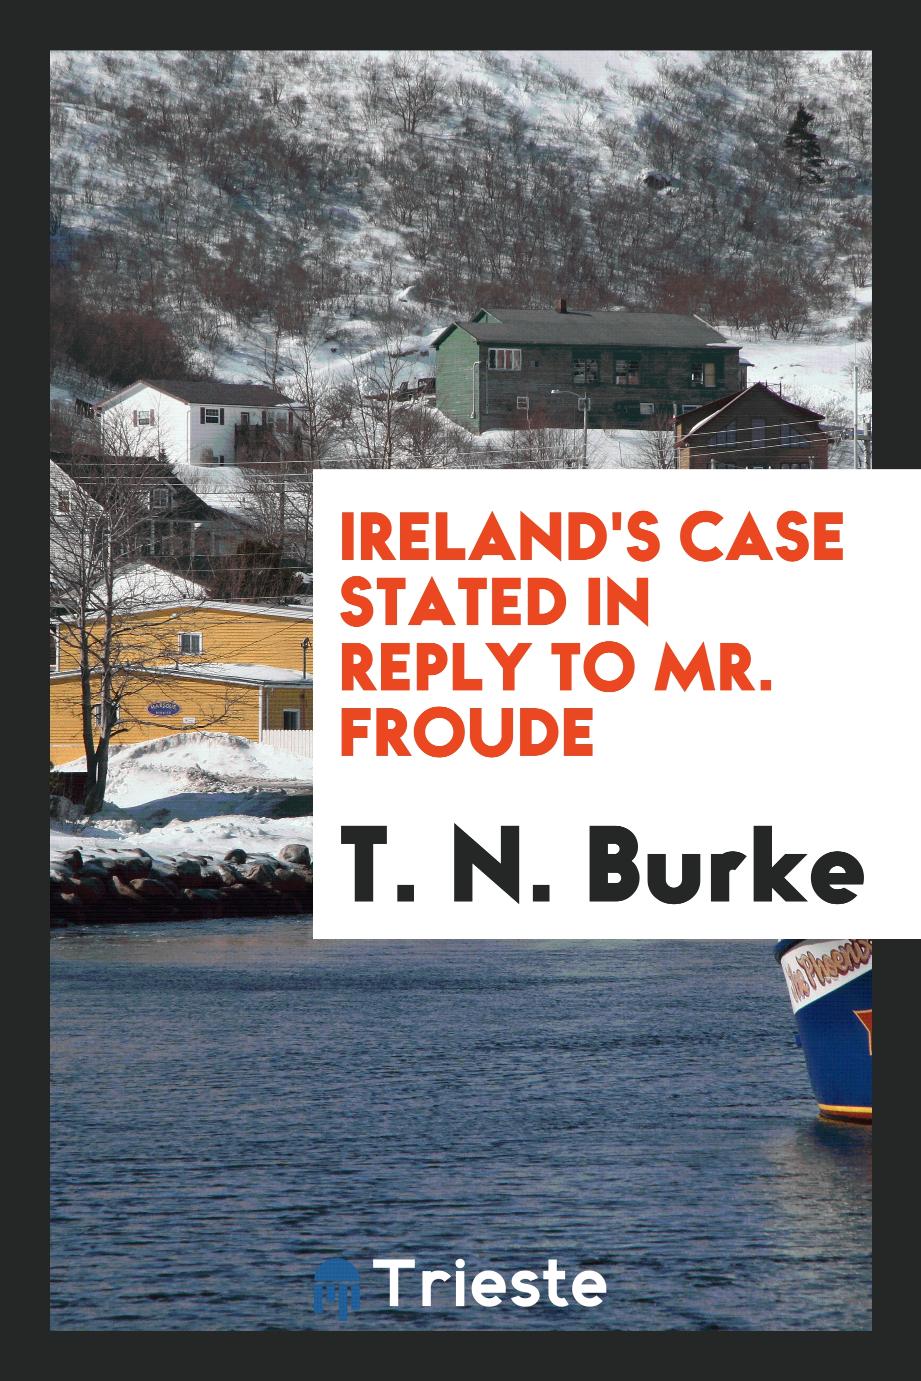 Ireland's case stated in reply to Mr. Froude